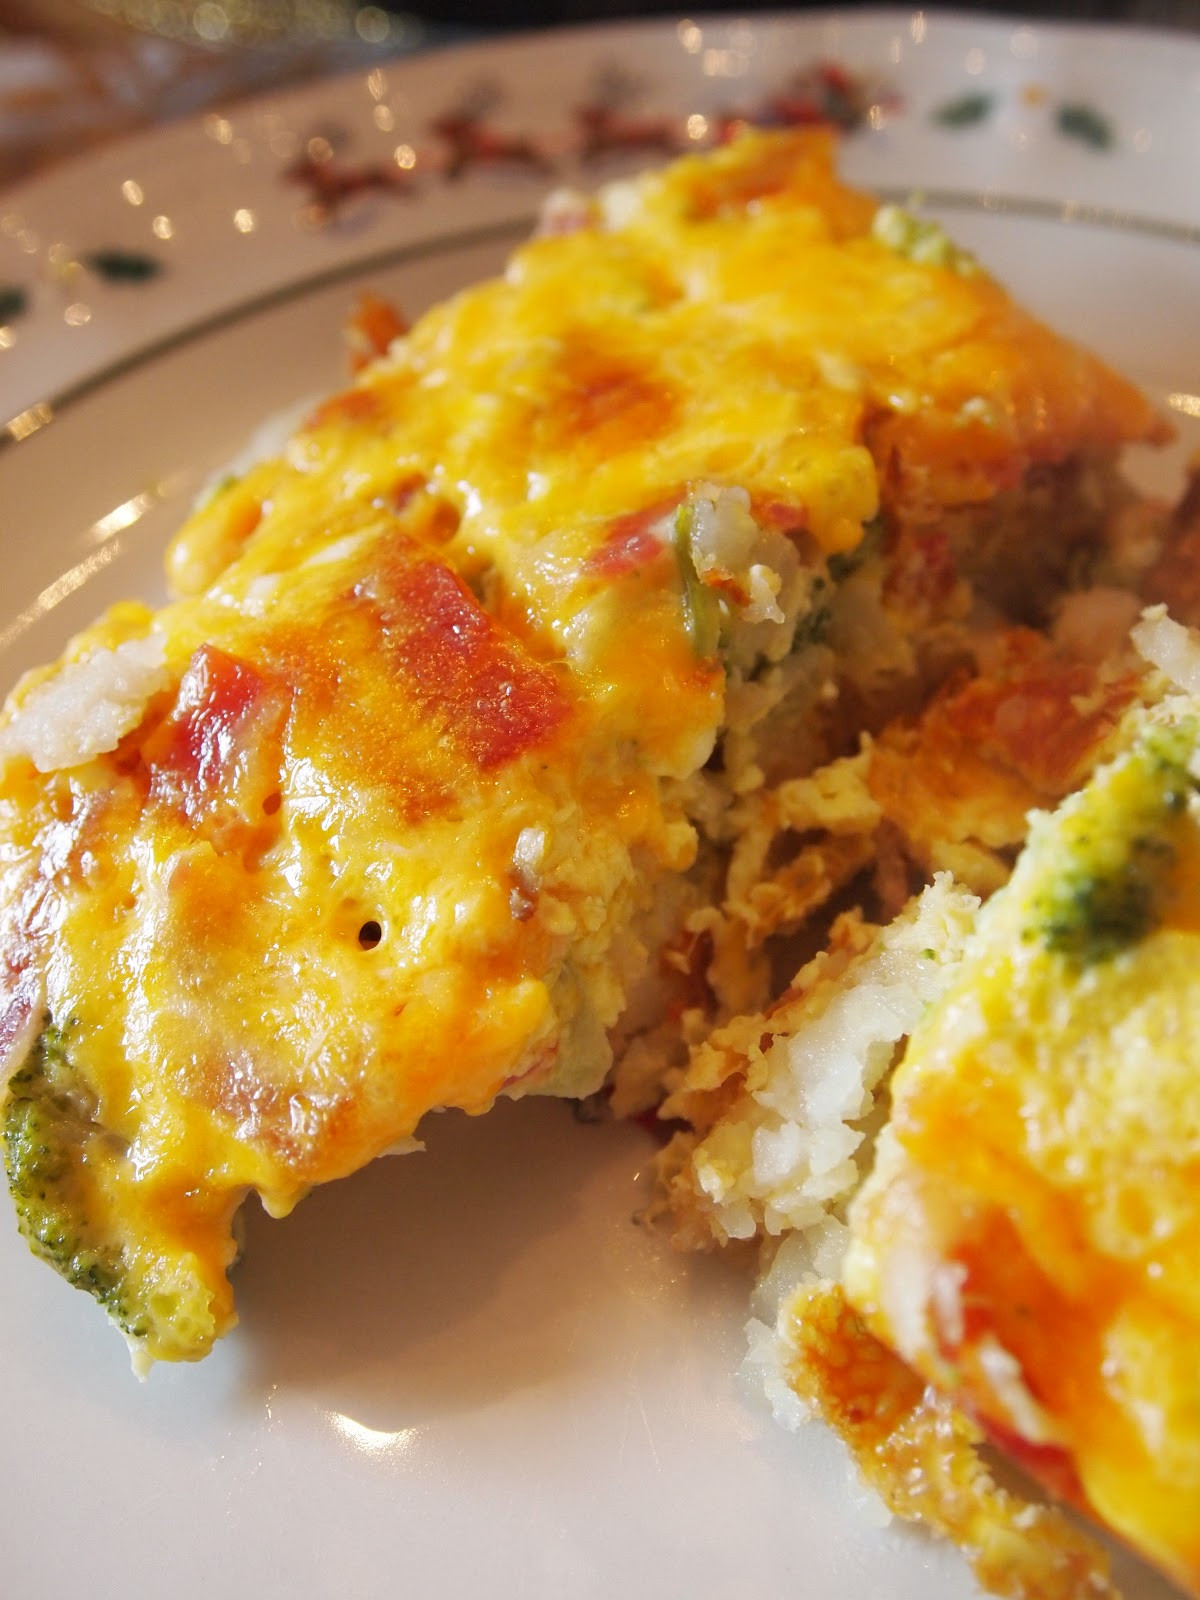 Breakfast Casserole With Tater Tots
 The Early Bird Baker Tater Tot Breakfast Casserole